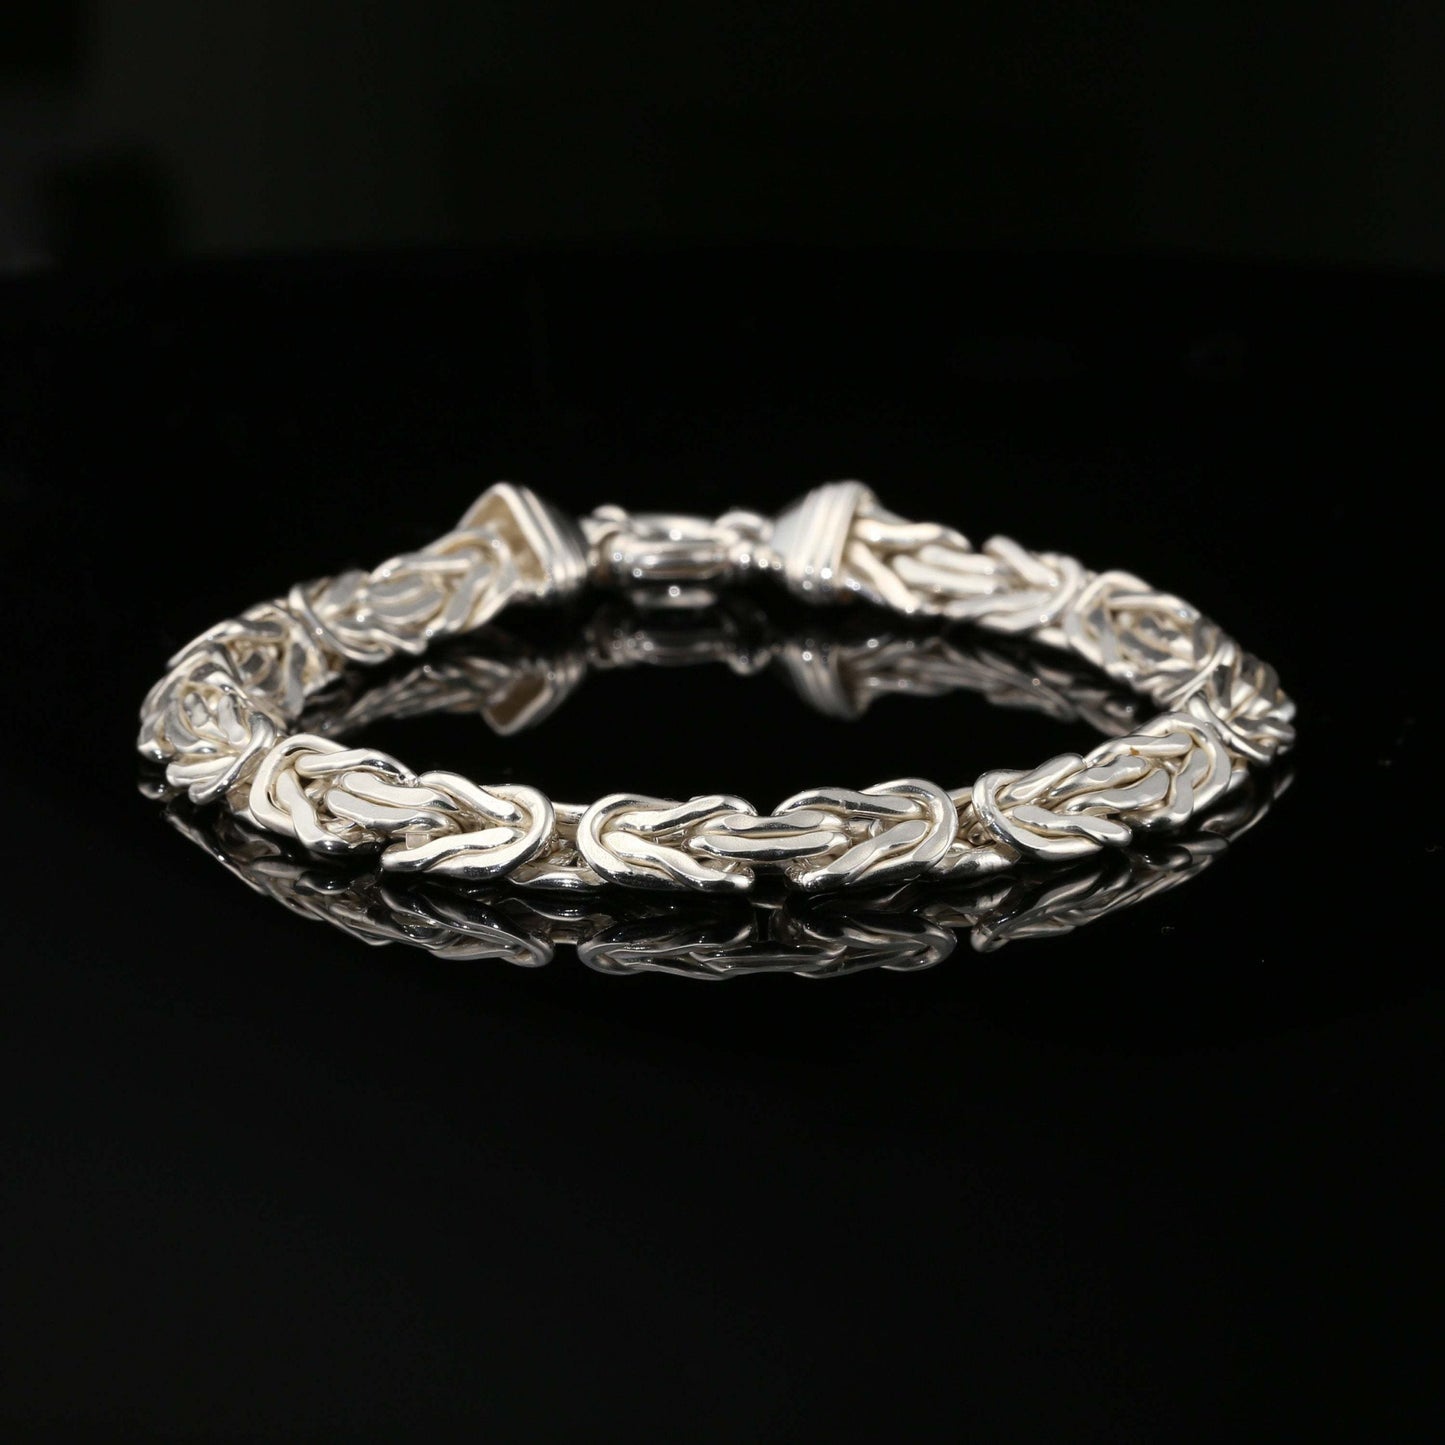 Thin Byzantine Chain Bracelet, Chainmail Jewelry in Sterling Silver, 8.75 inch, Unisex